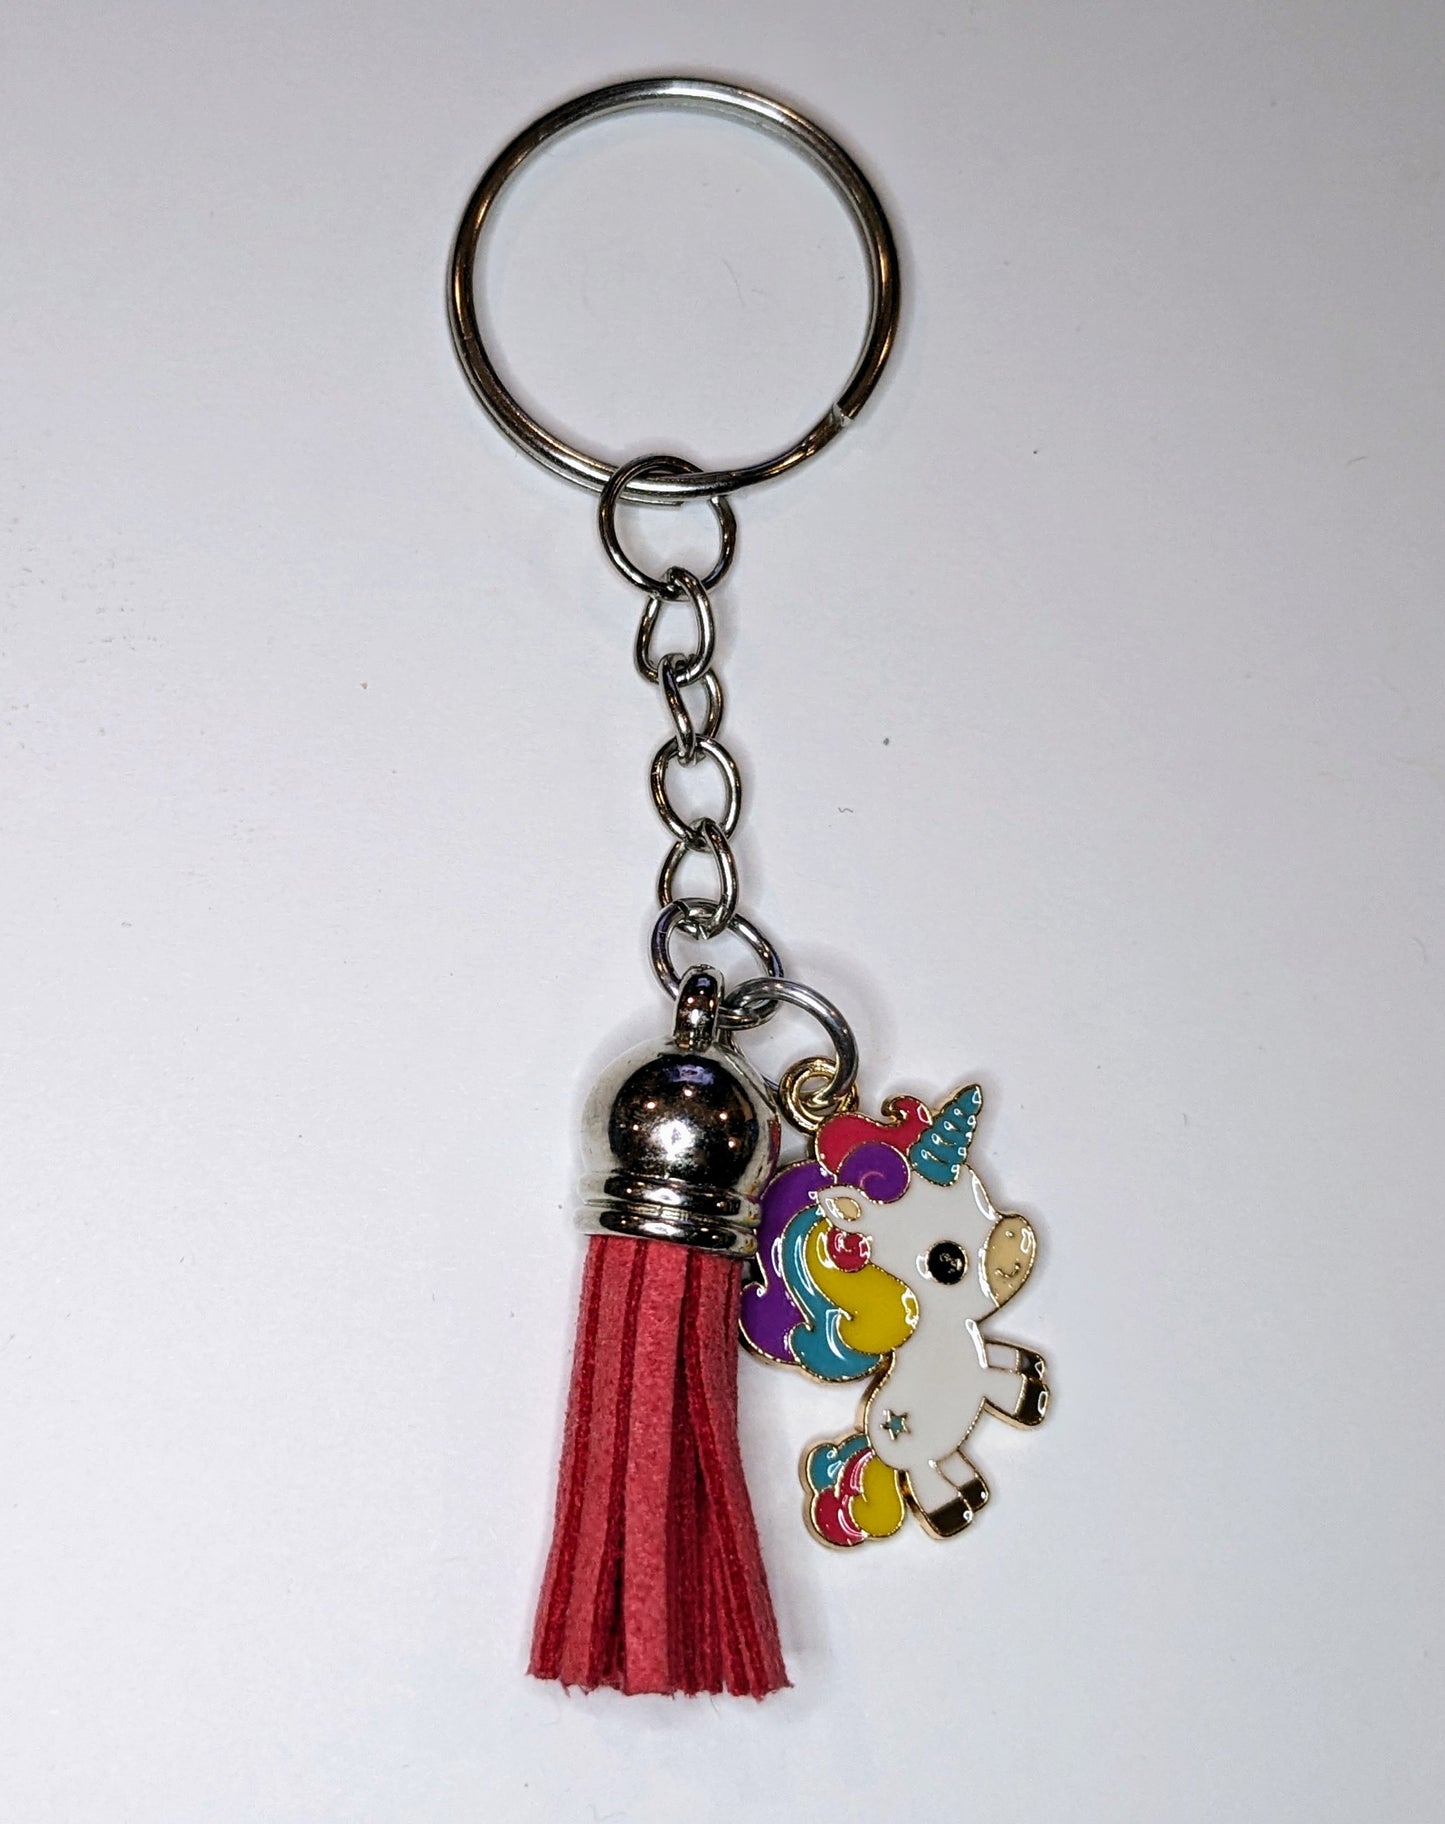 Geeky Quirky Keychains